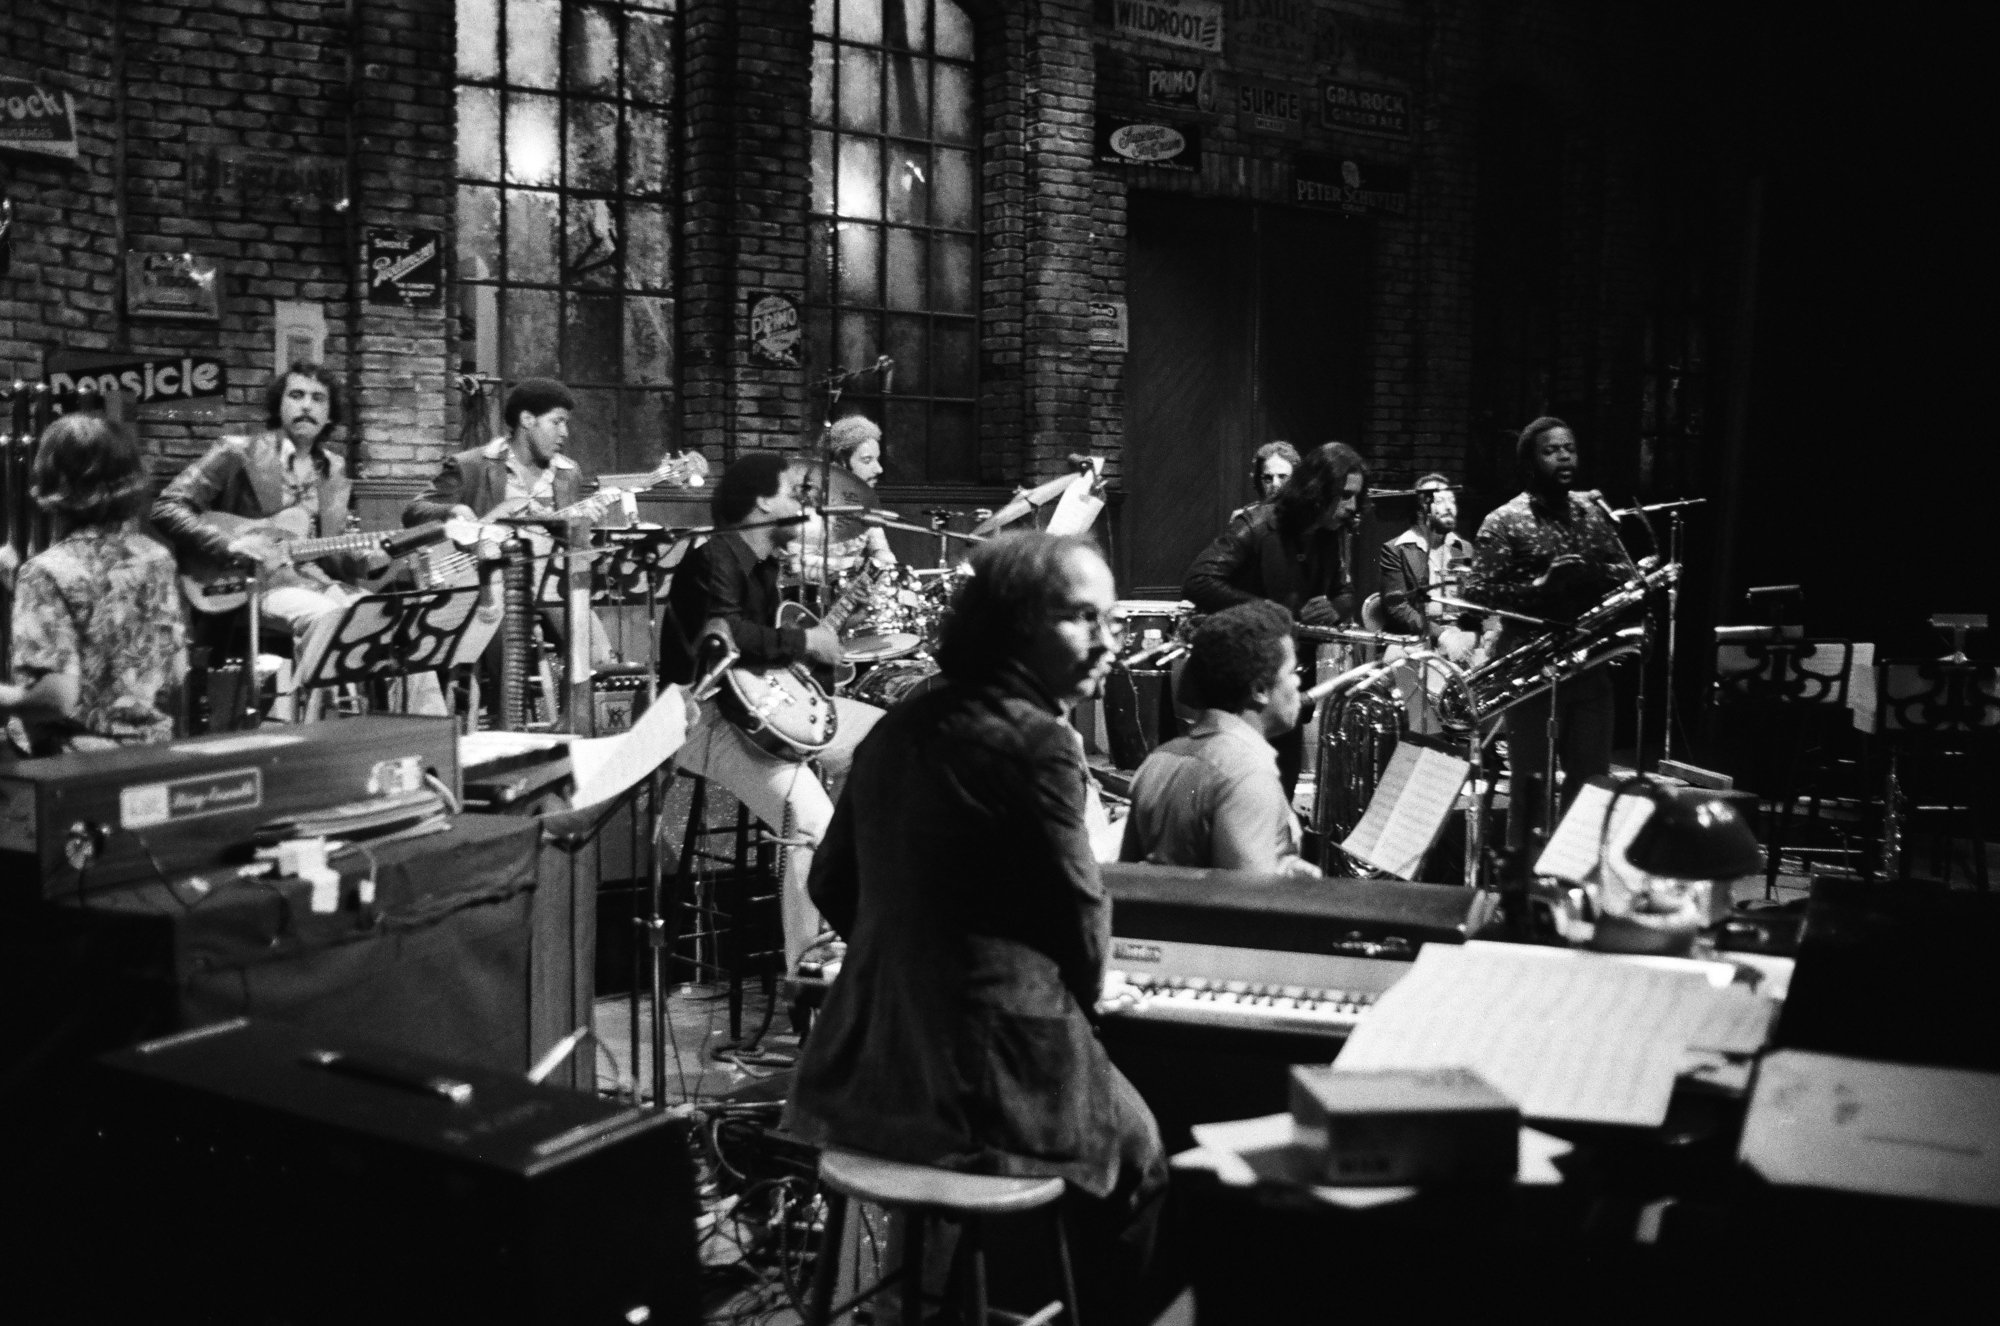 'Saturday Night Live' band performing opening theme song in black-and-white picture